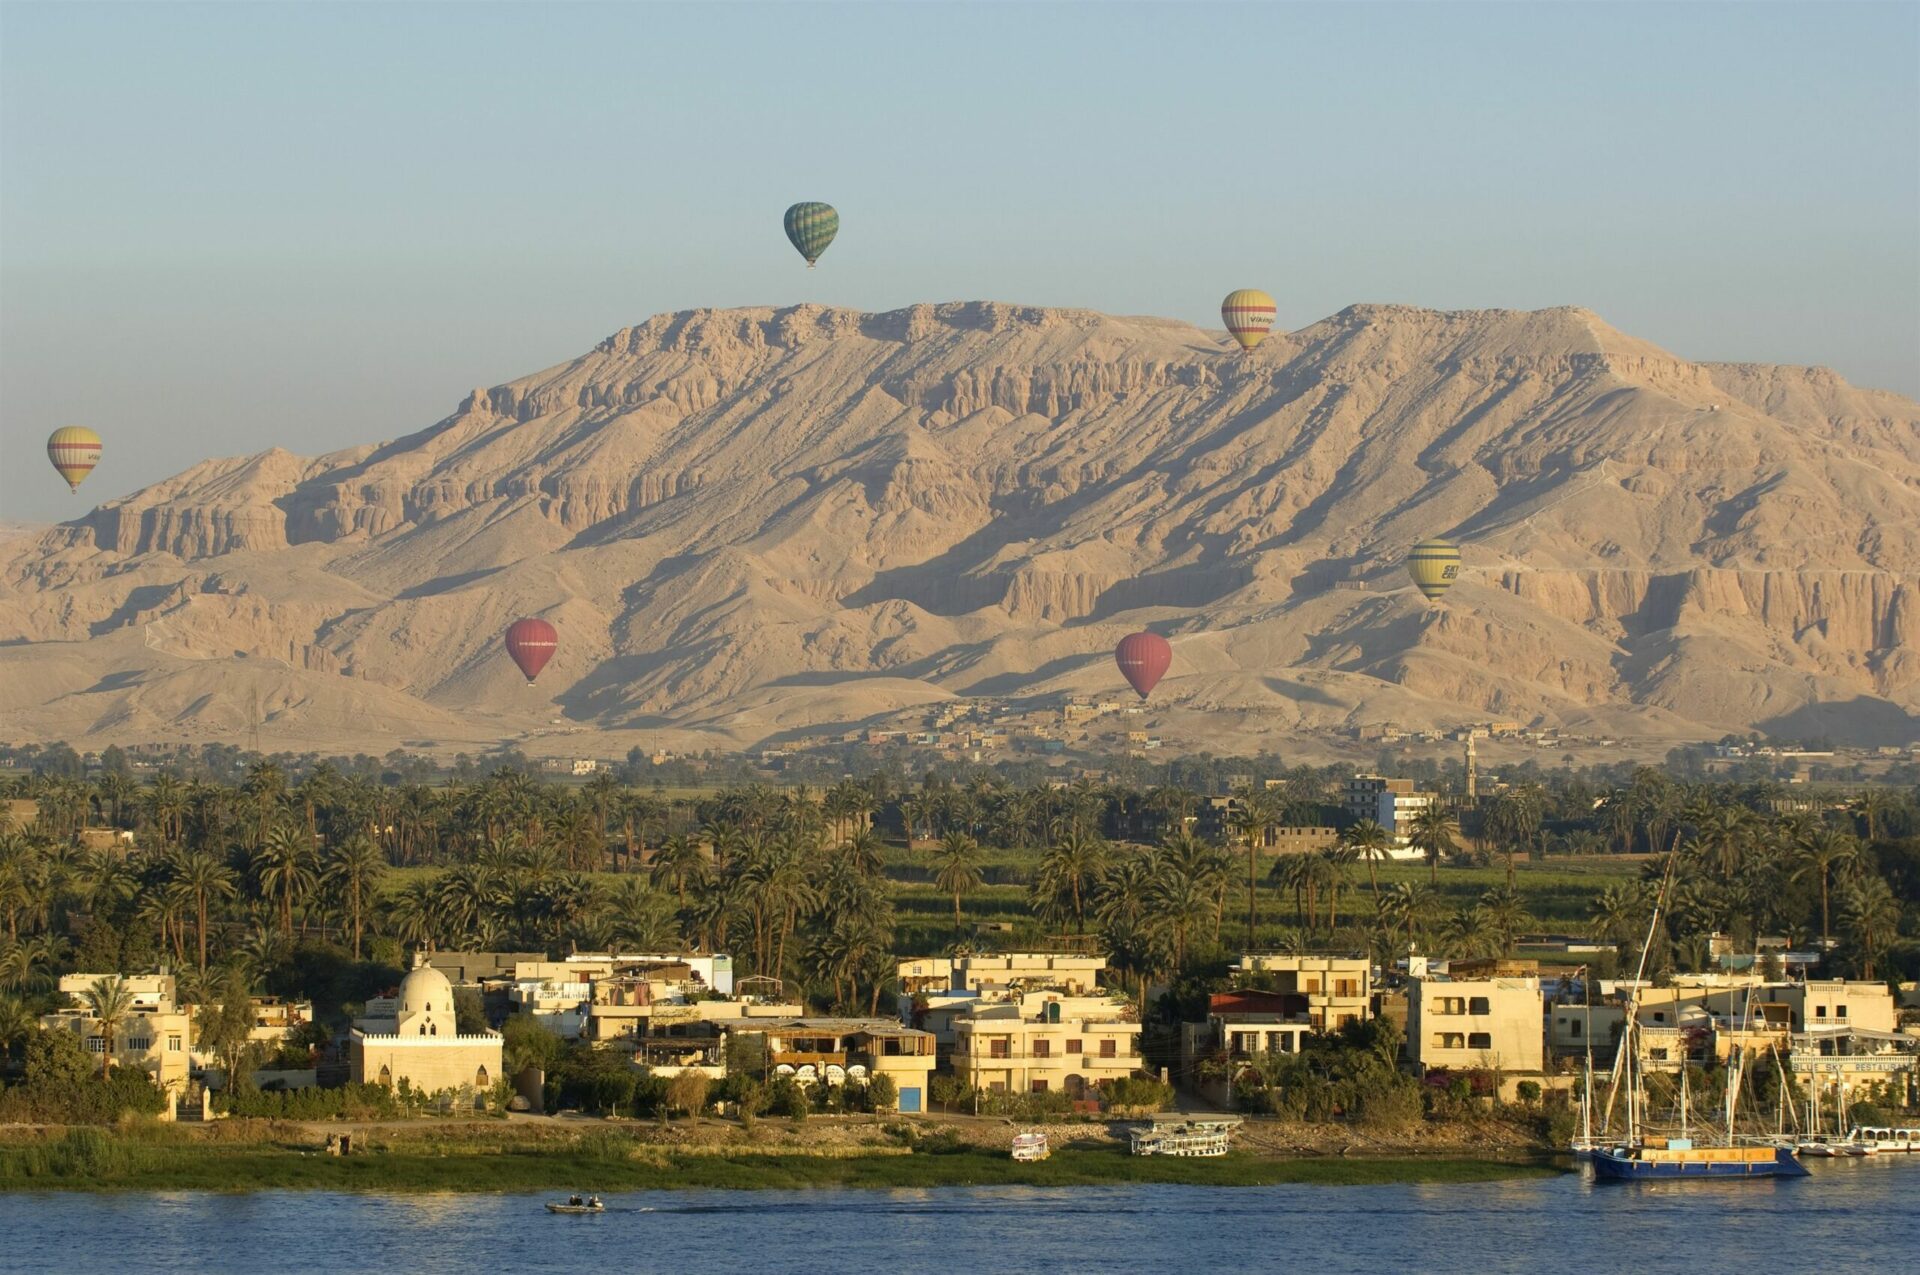 Luxor Nile Valley with hot air balloons in the sky on our best Egypt safari